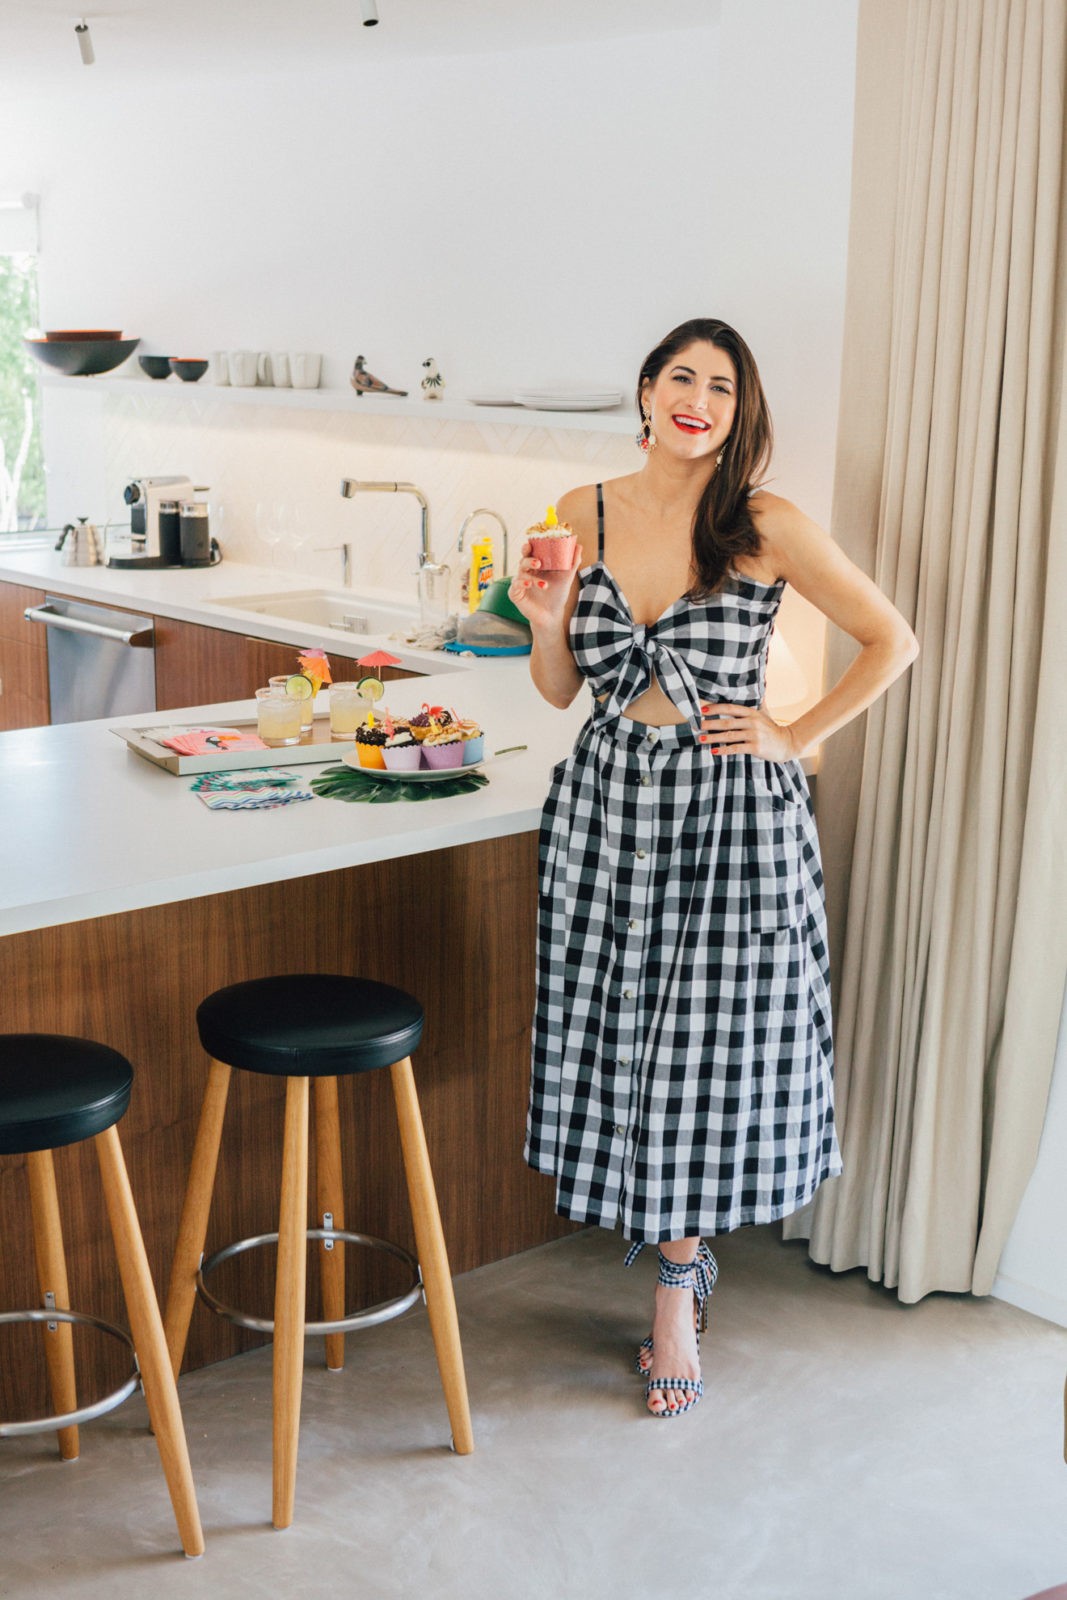 10 Tips For Hosting A Dinner Party Every Hostess Should Know featured by popular Los Angeles life and style blogger Laura Lily